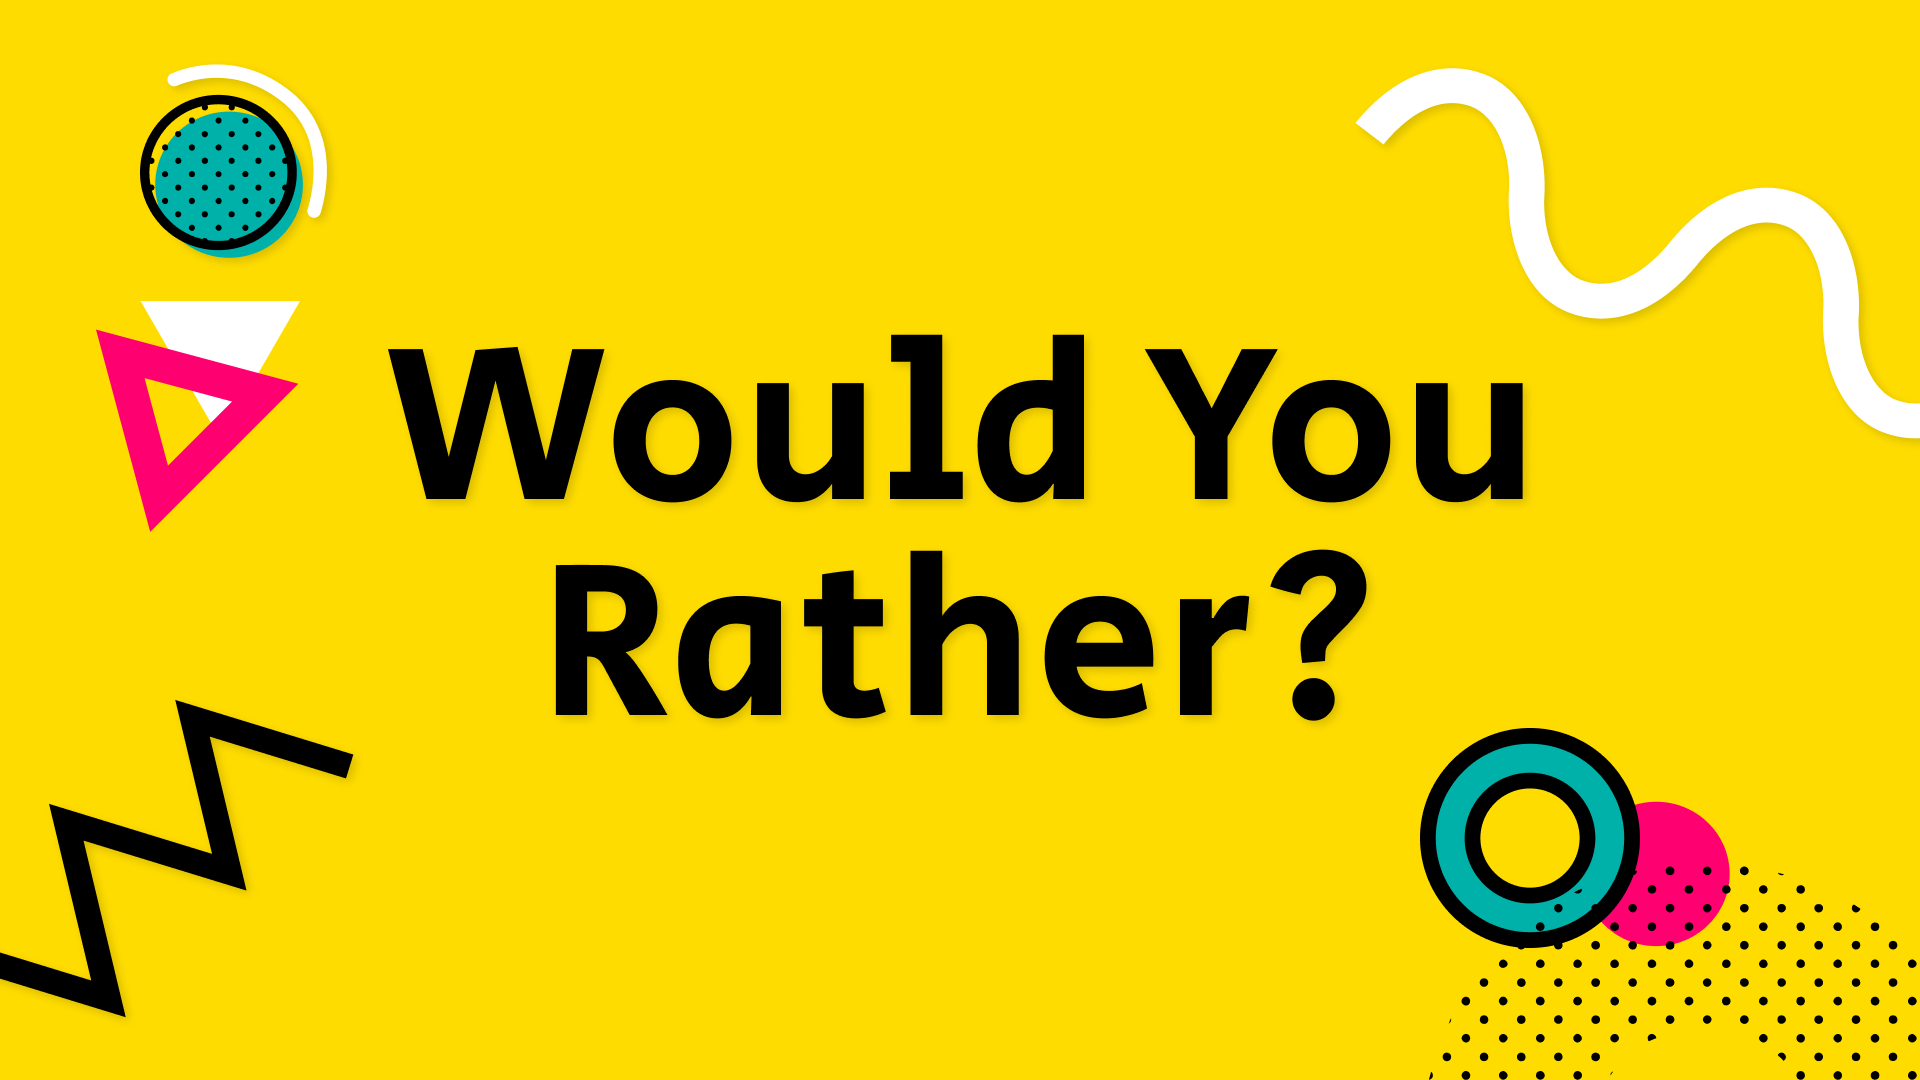 The 10 most controversial 'Would you Rather' questions